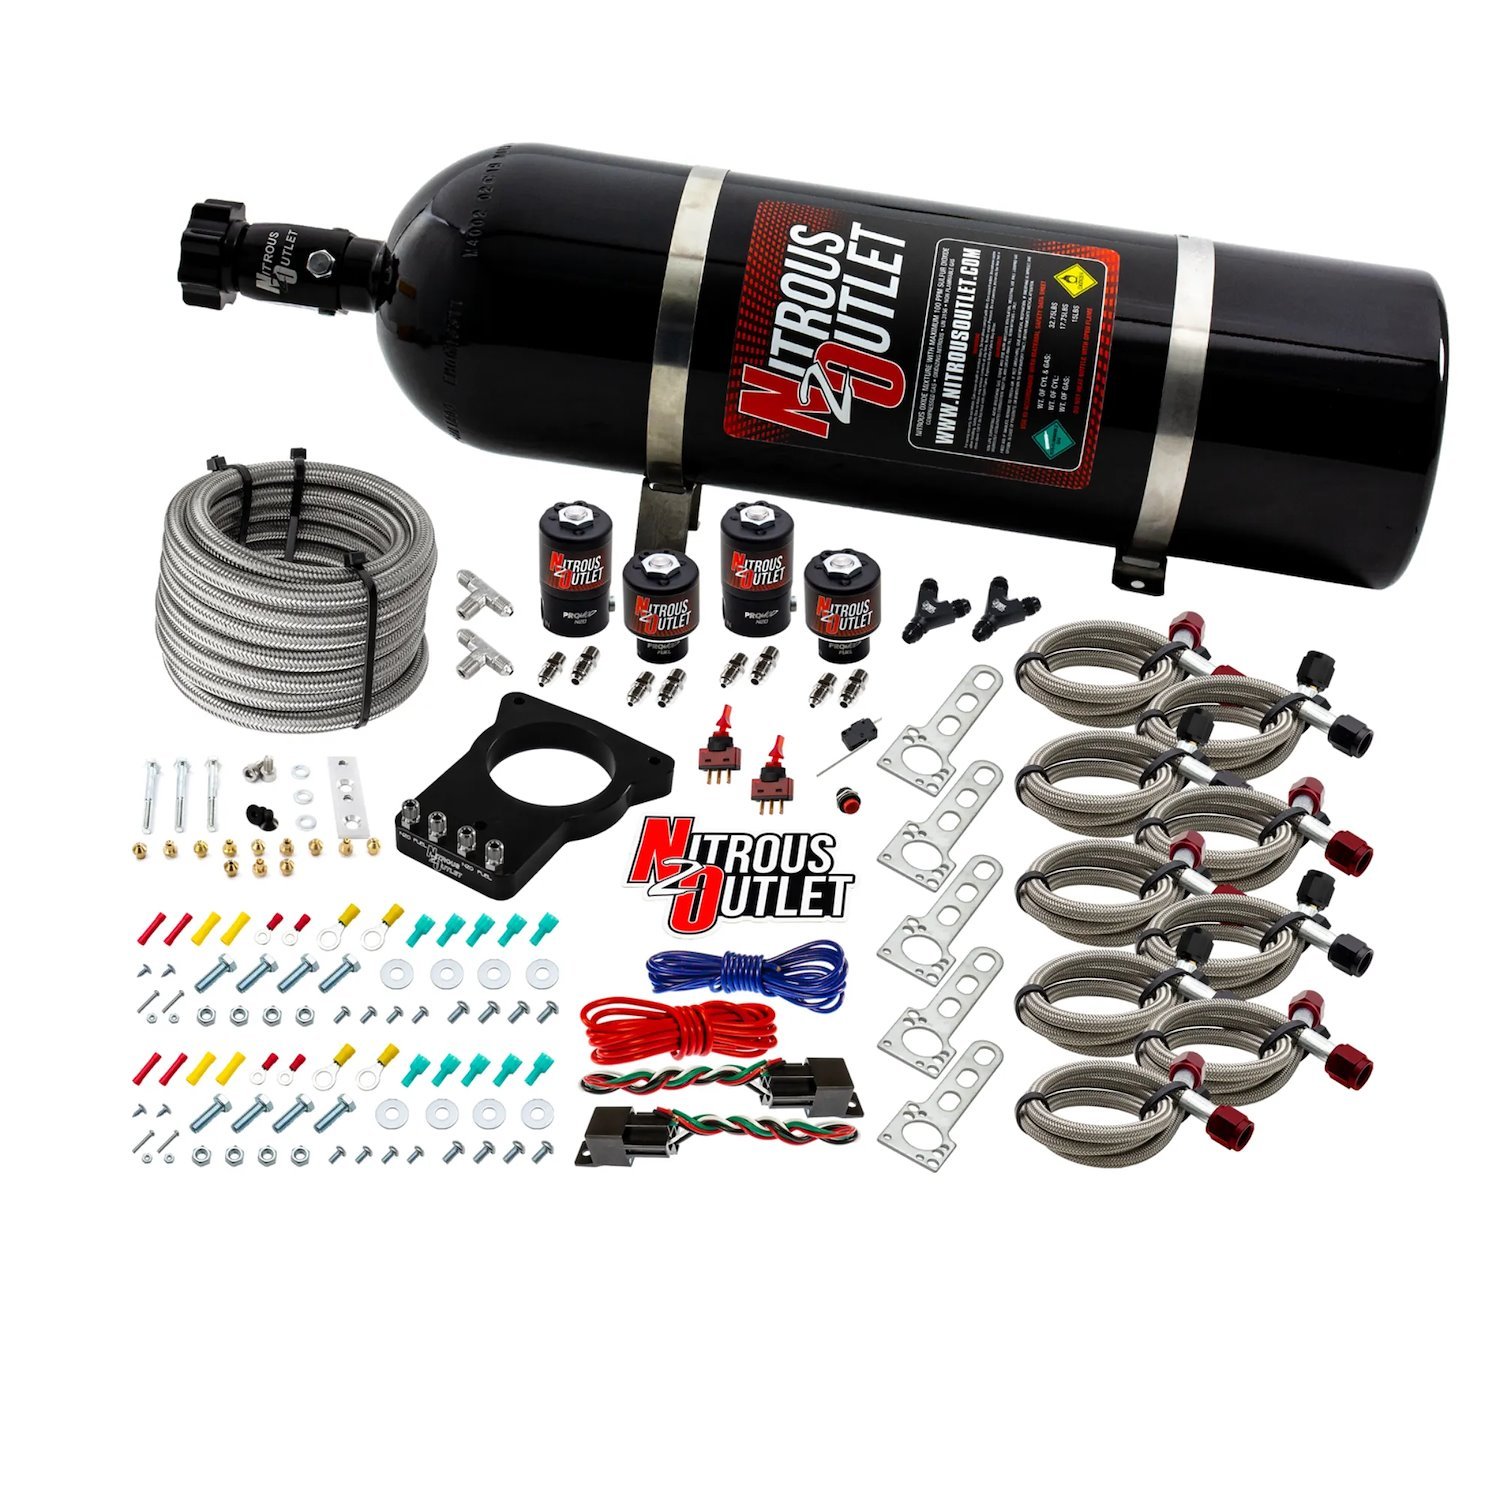 00-10103-15 GM 78 mm Dual-Stage LSX Plate System, Gas/E85, 5-55psi, 50-200HP, 15lb Bottle